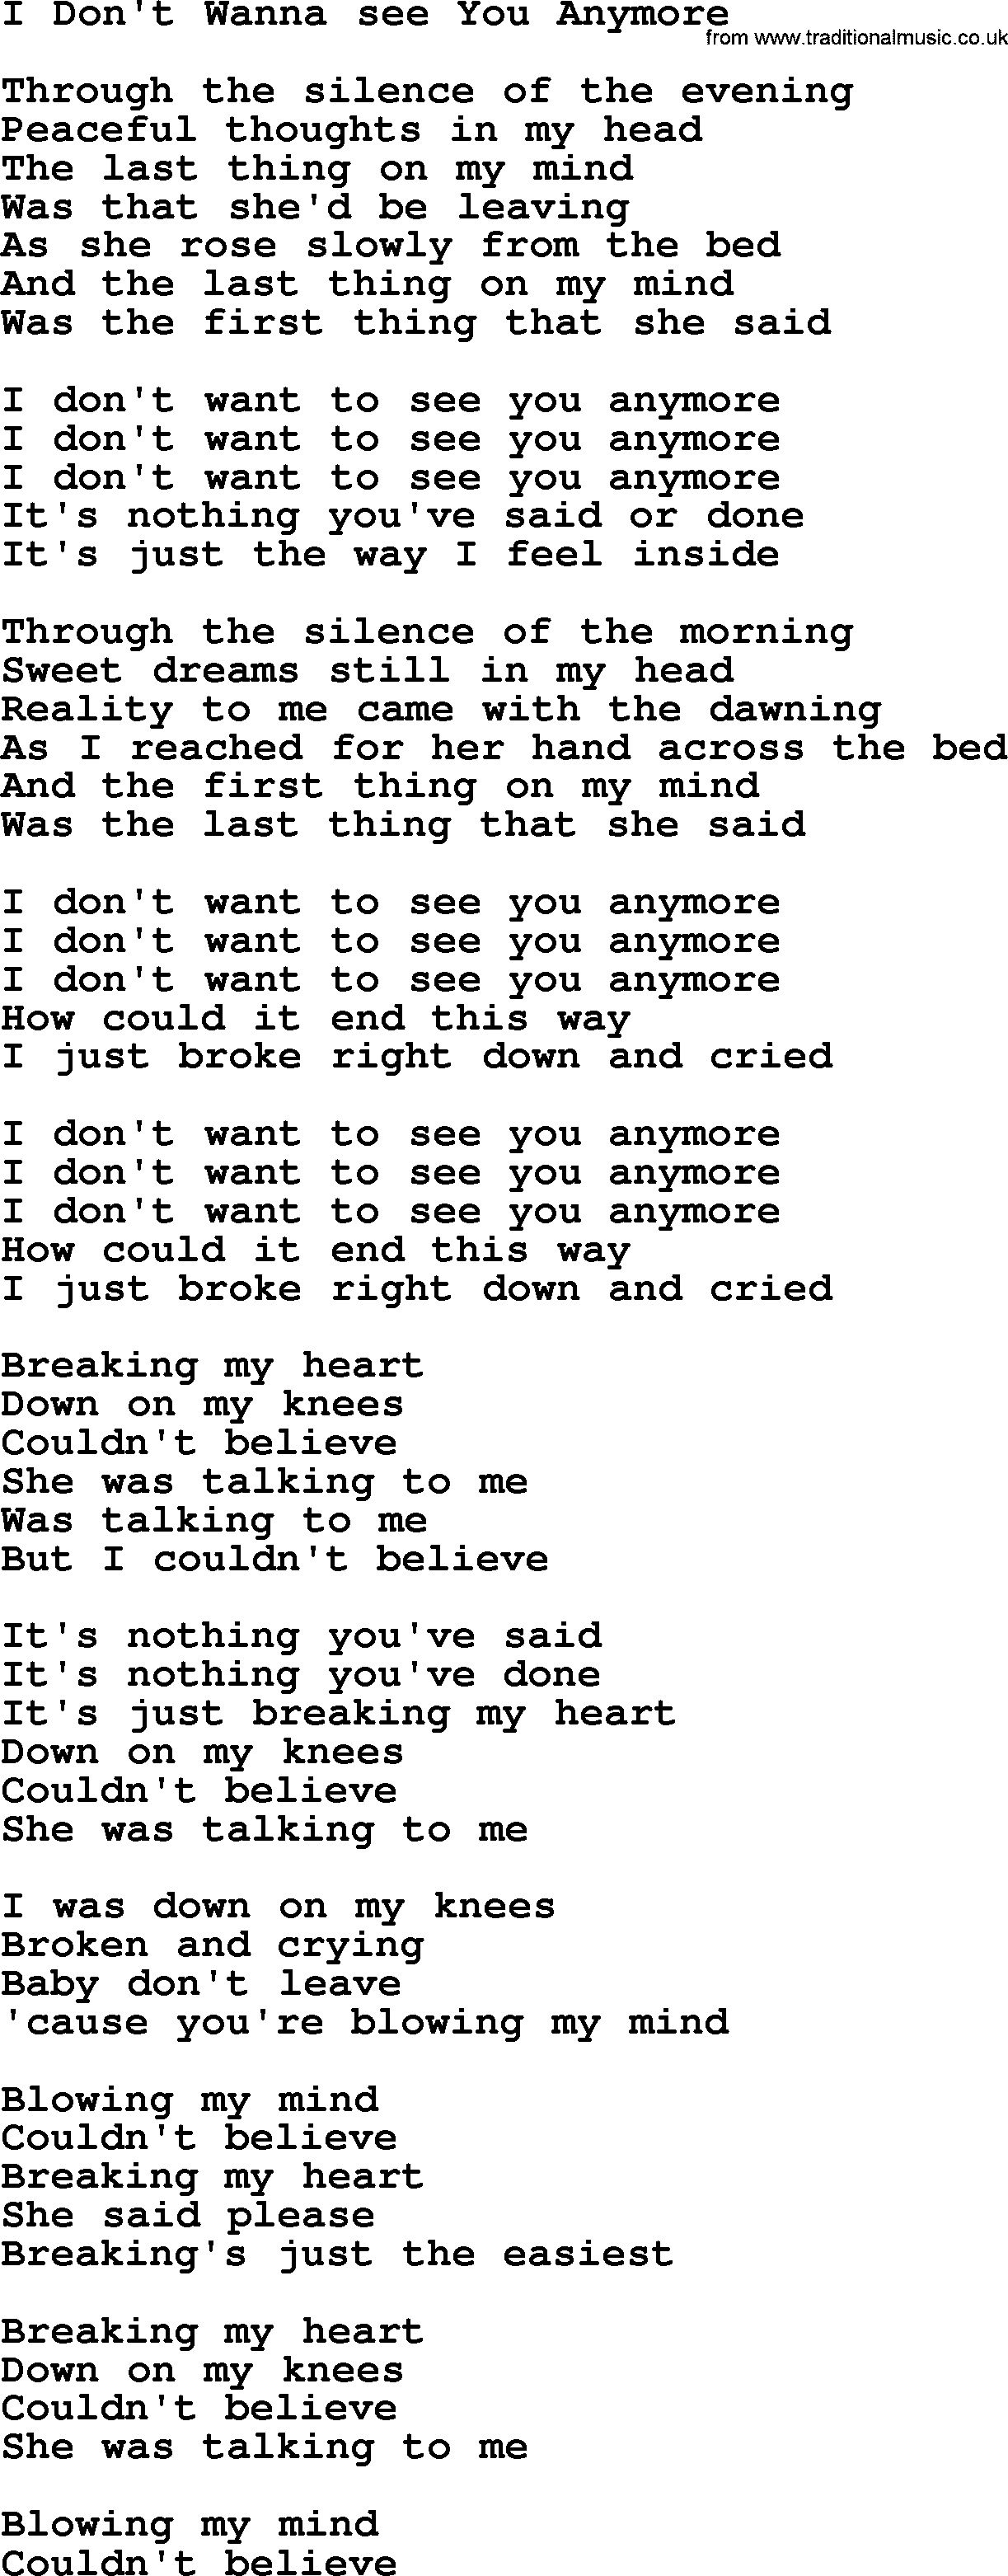 The Byrds song I Don't Wanna See You Anymore, lyrics